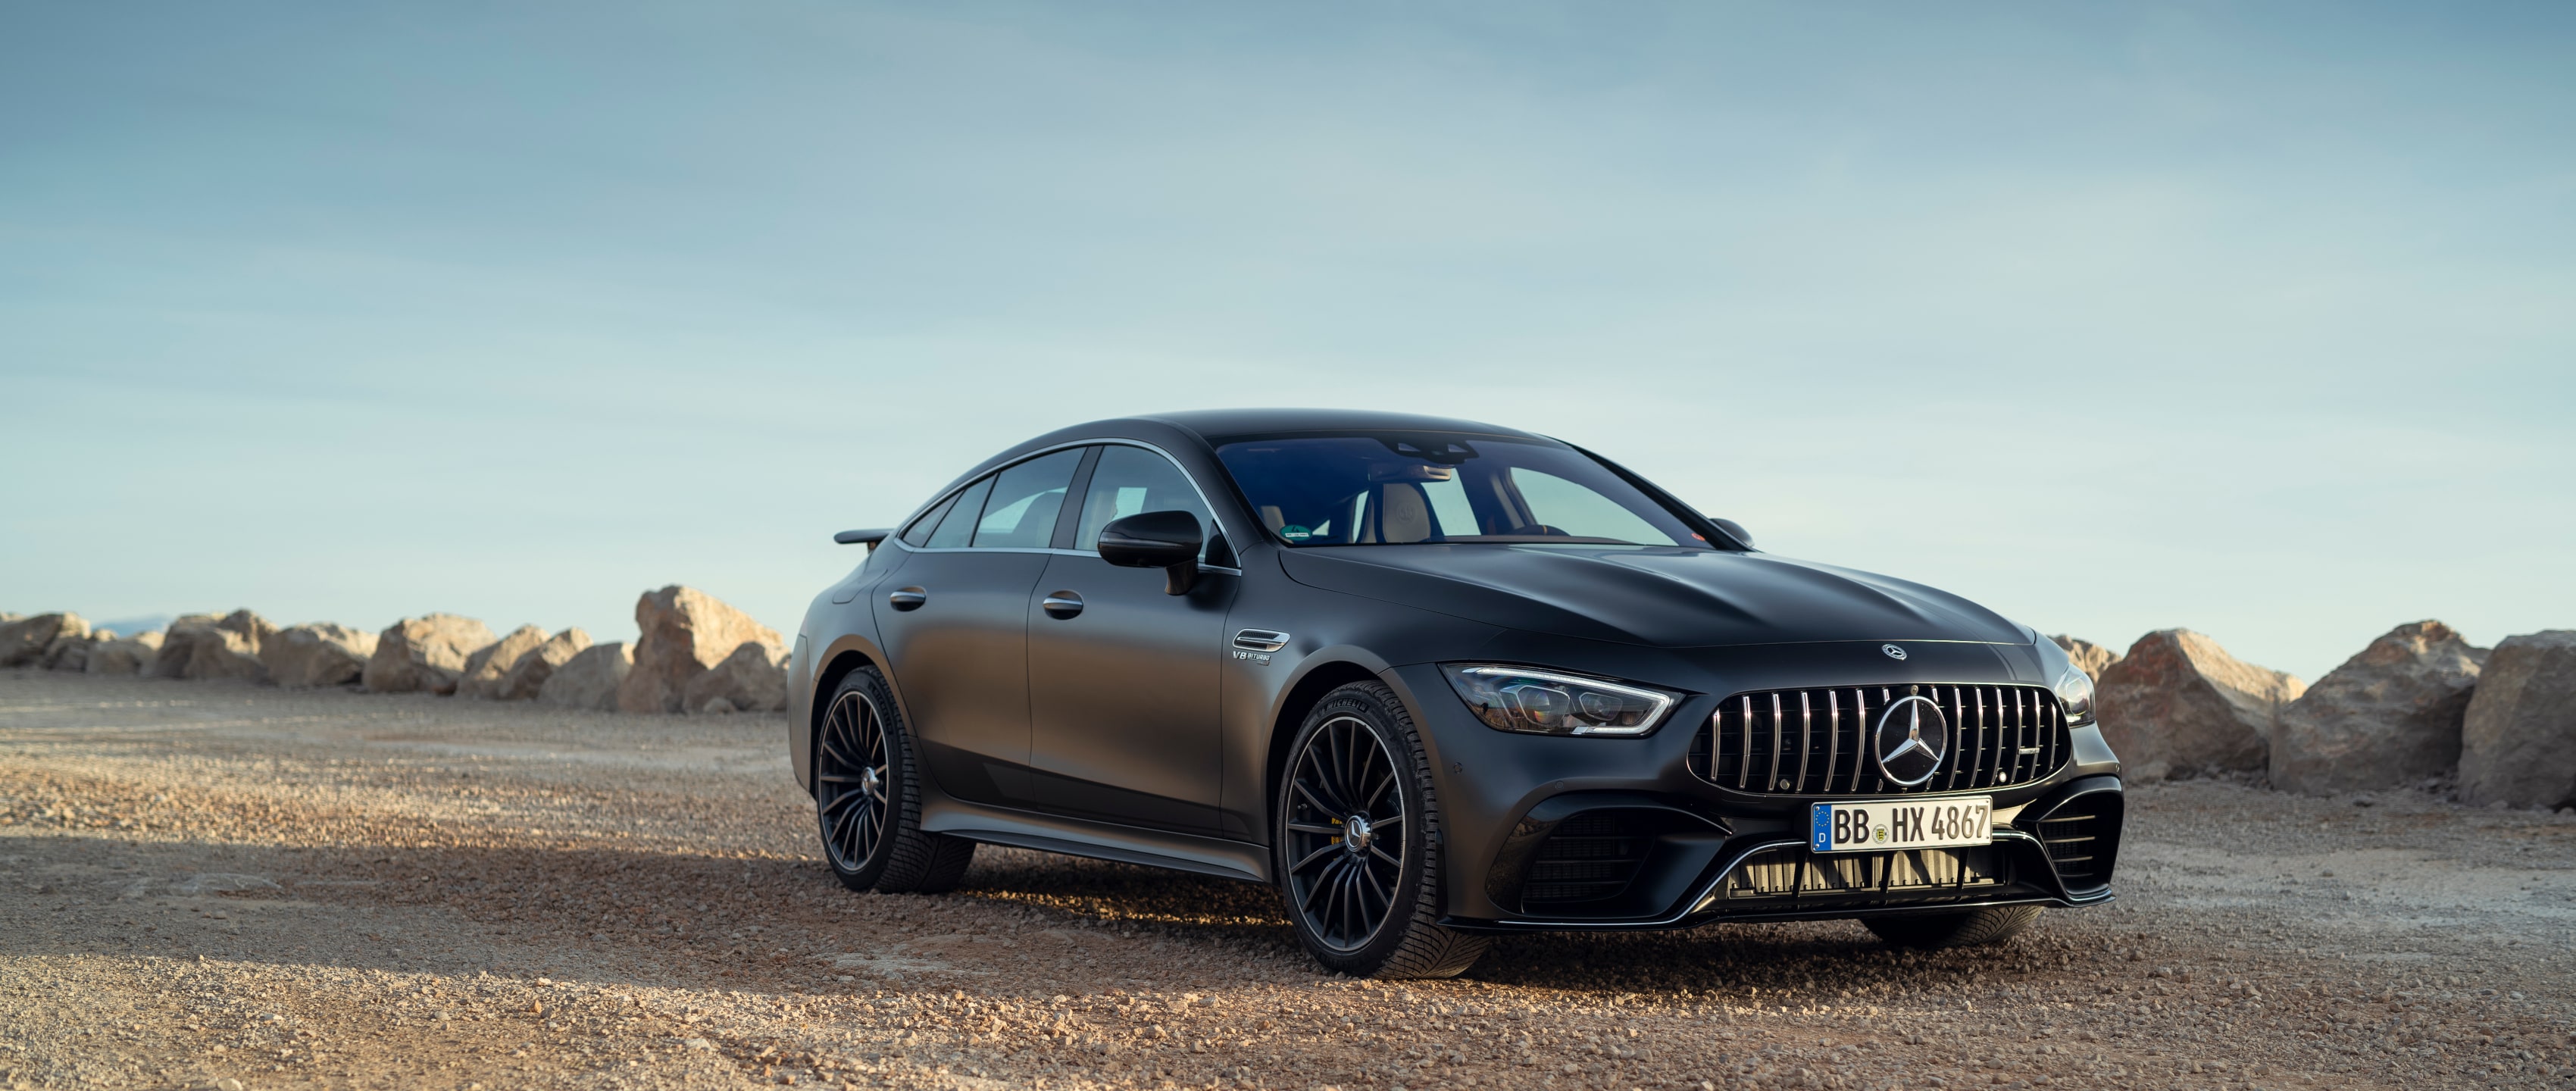 Mercedes-Amg Gt 63 S Wallpapers